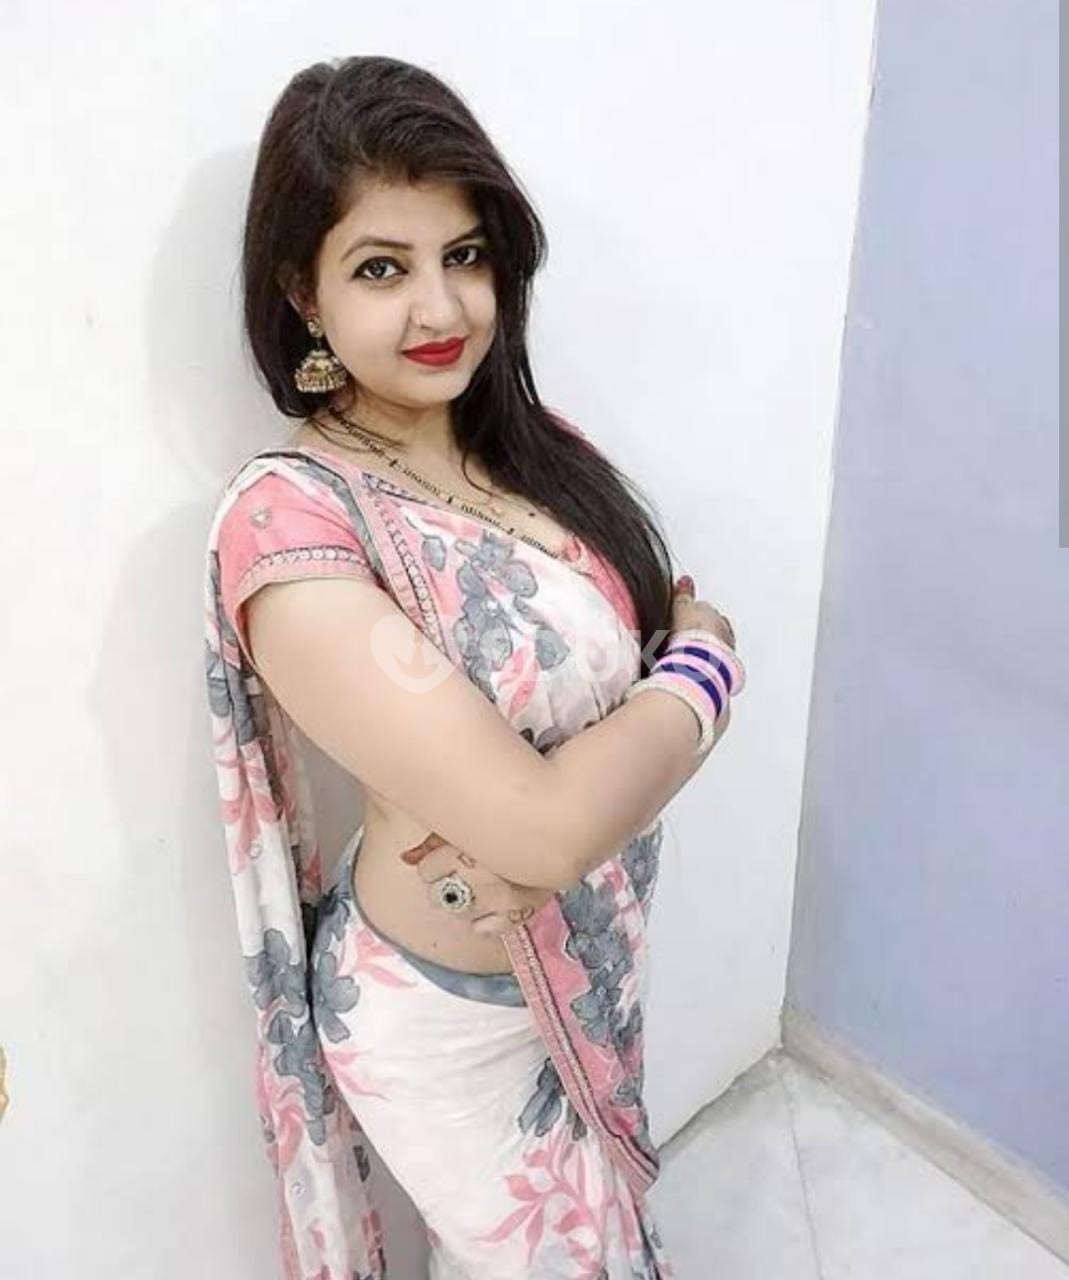 Anna nagar ❣️✅🔥▄BEST ESCORT TODAY LOW PRICE SAFE AND SECURE GENUINE CALL GIRL AFFORDABLE PRICE CALL NOW�